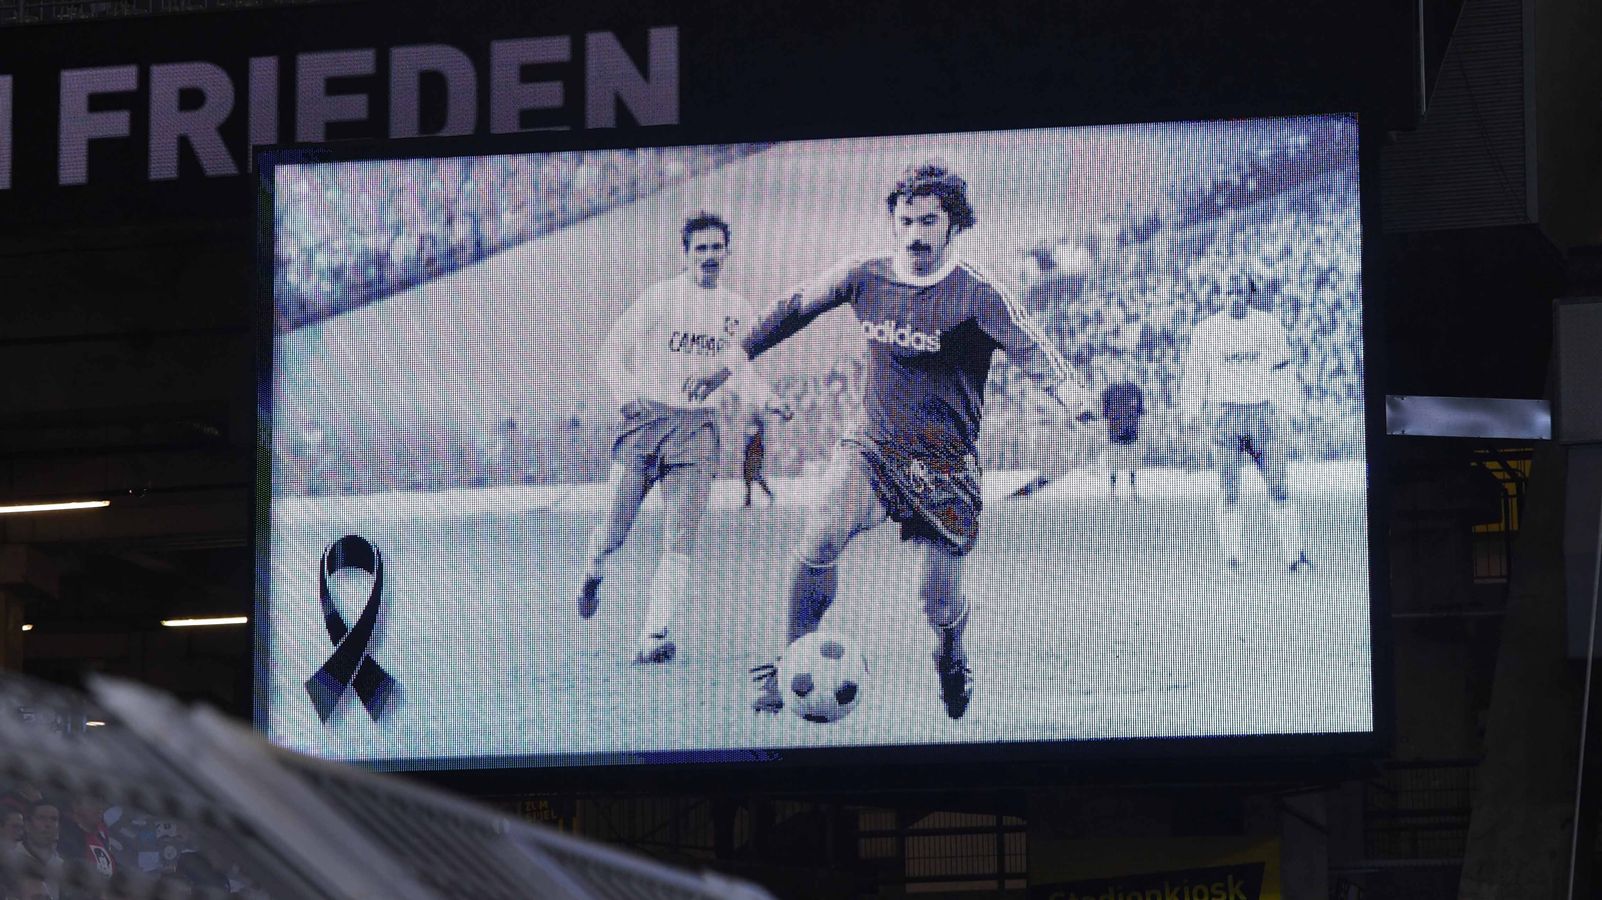 Mourning for Gerd Müller: “The world of FC Bayern is still”